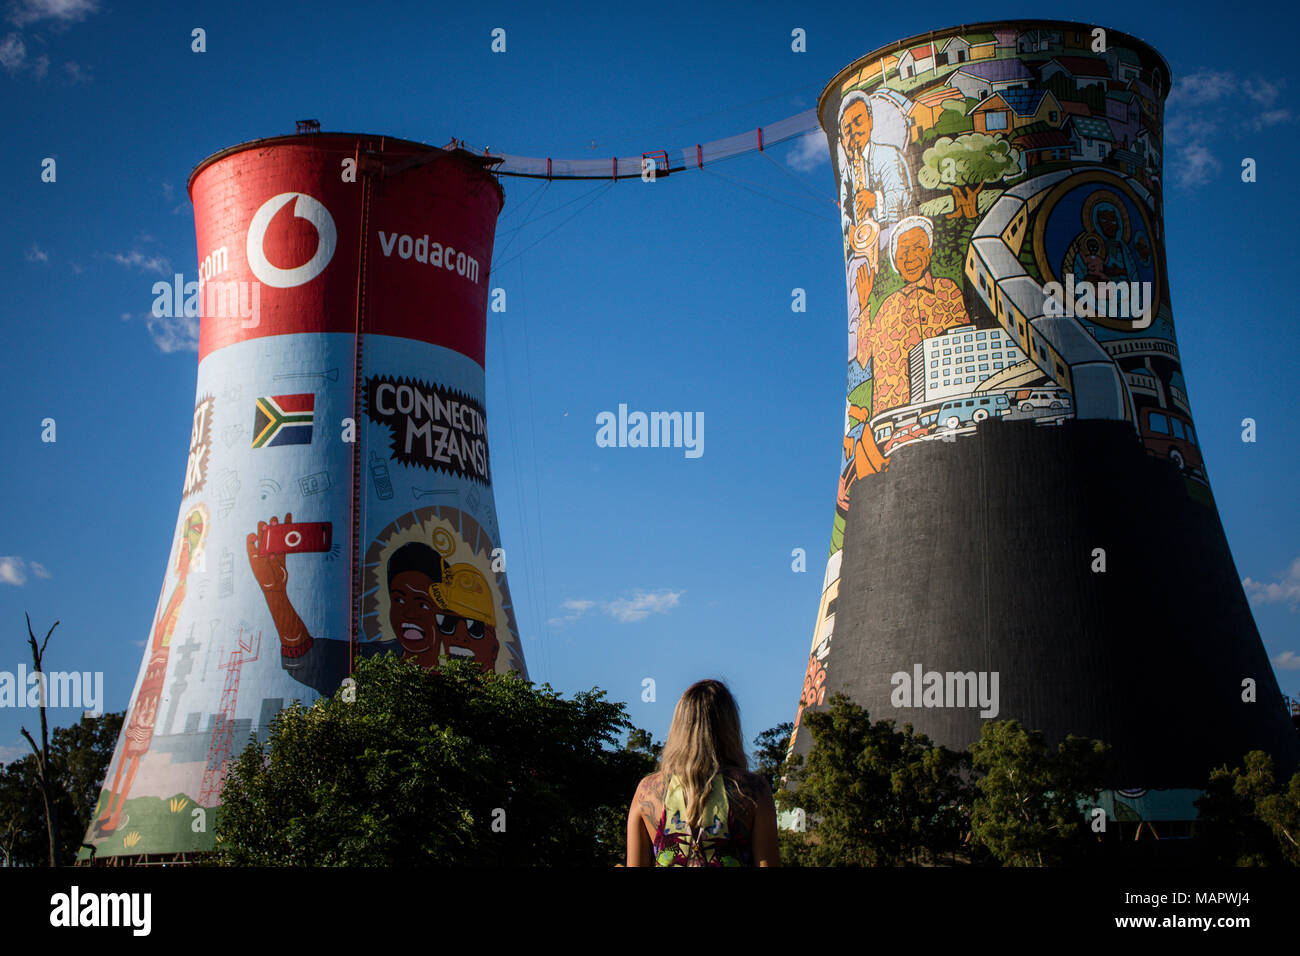 Girl at Orlando Towes in Soweto, South Africa. Stock Photo